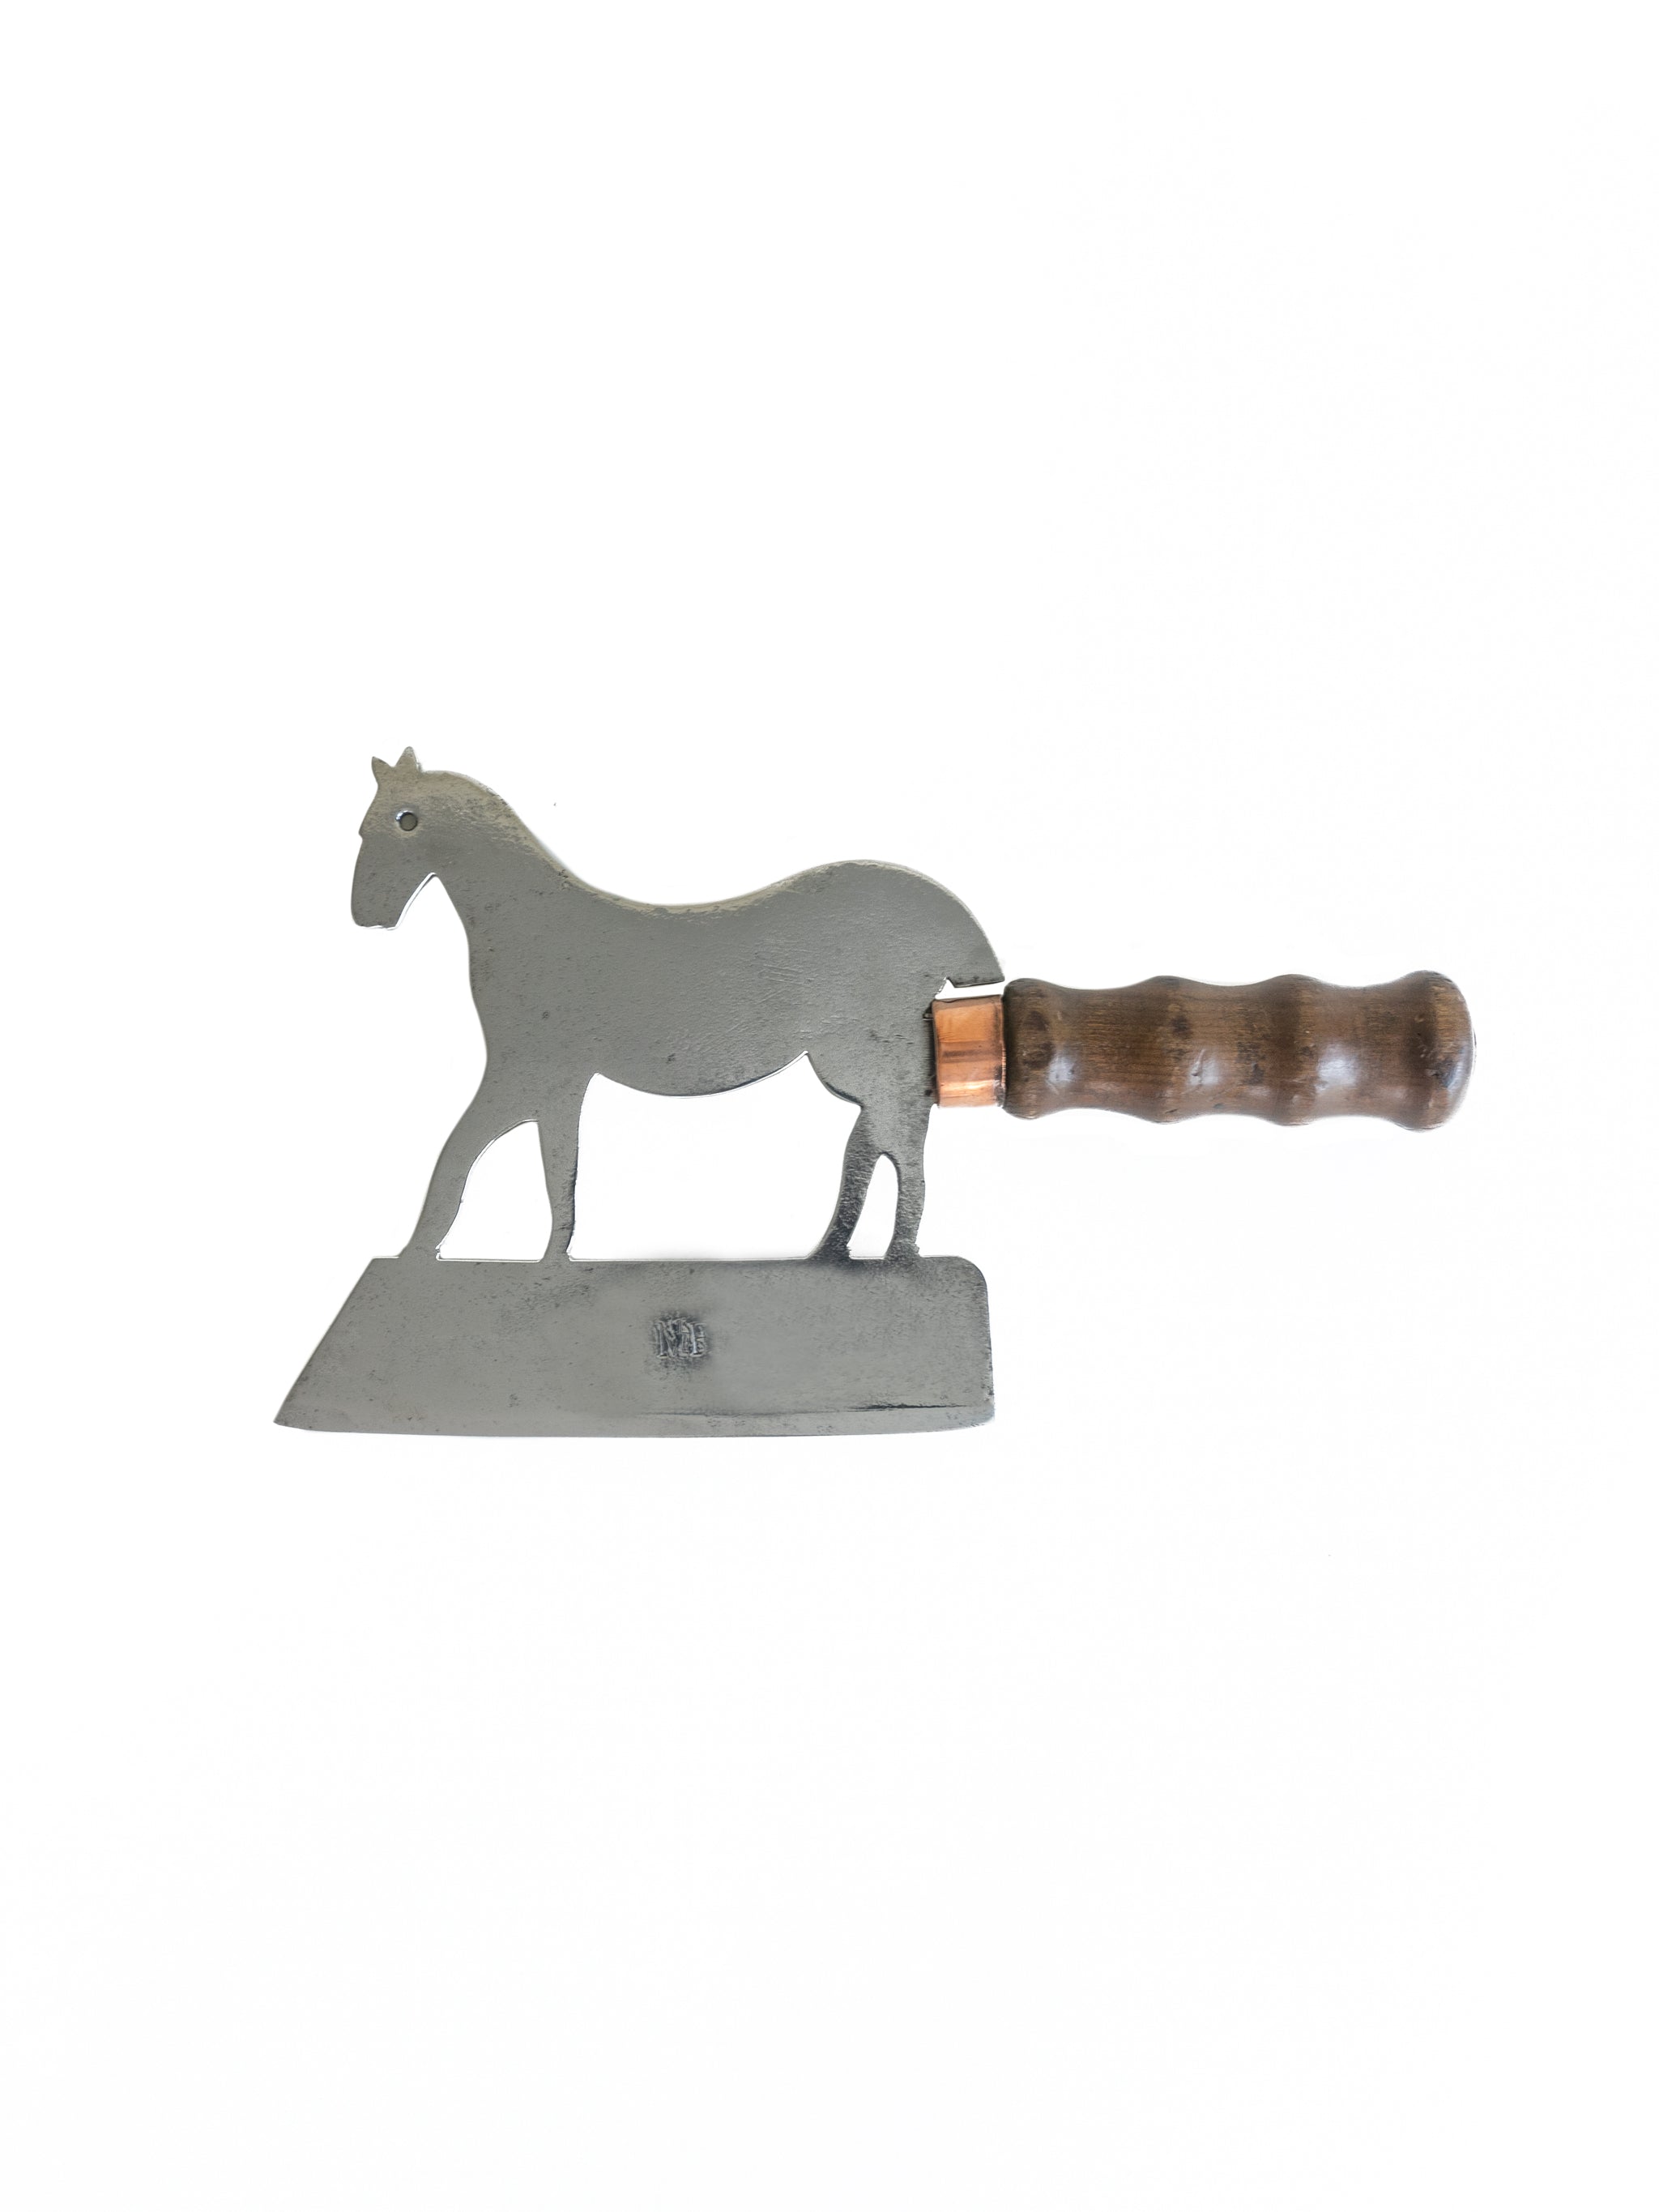 http://westontable.com/cdn/shop/products/1880s-English-Horse-Shaped-Ice-and-Sugar-Cleaver-Weston-Table-SP.jpg?v=1620830220